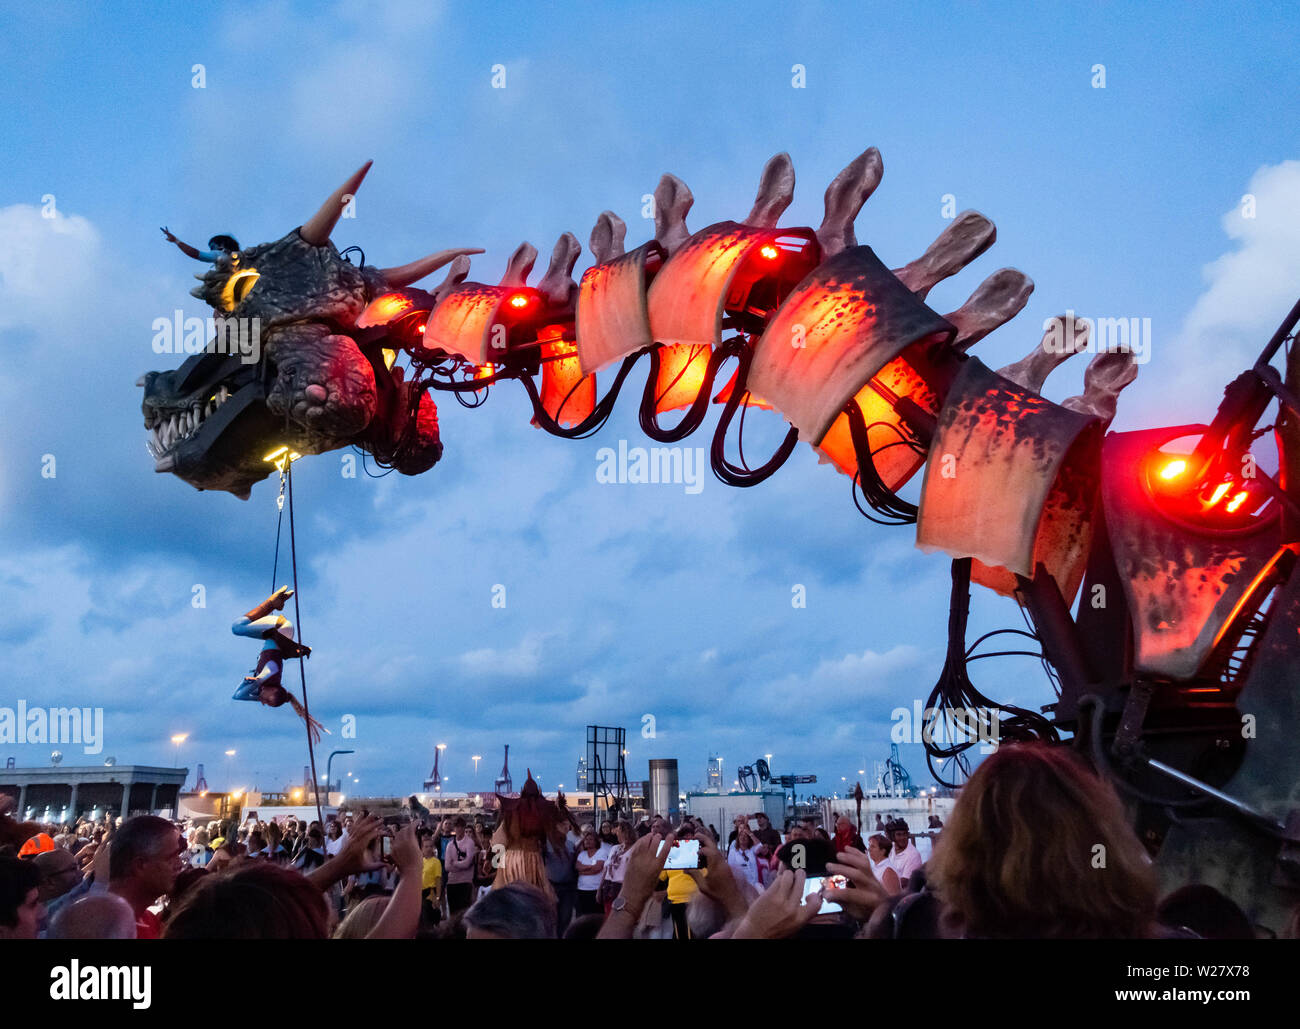 Las Palmas, Gran Canaria, Canary Islands, Spain. 6th July 2019. 'Dragonautes', a huge Dragon, the creation of French theatre group, Planete Vapeur, takes to the streets of Las Palmas as the 2019 festival of theatre, music and dance (TEMUDAS) gets under way. Credit:Alan Dawson/Alamy Live News. Stock Photo